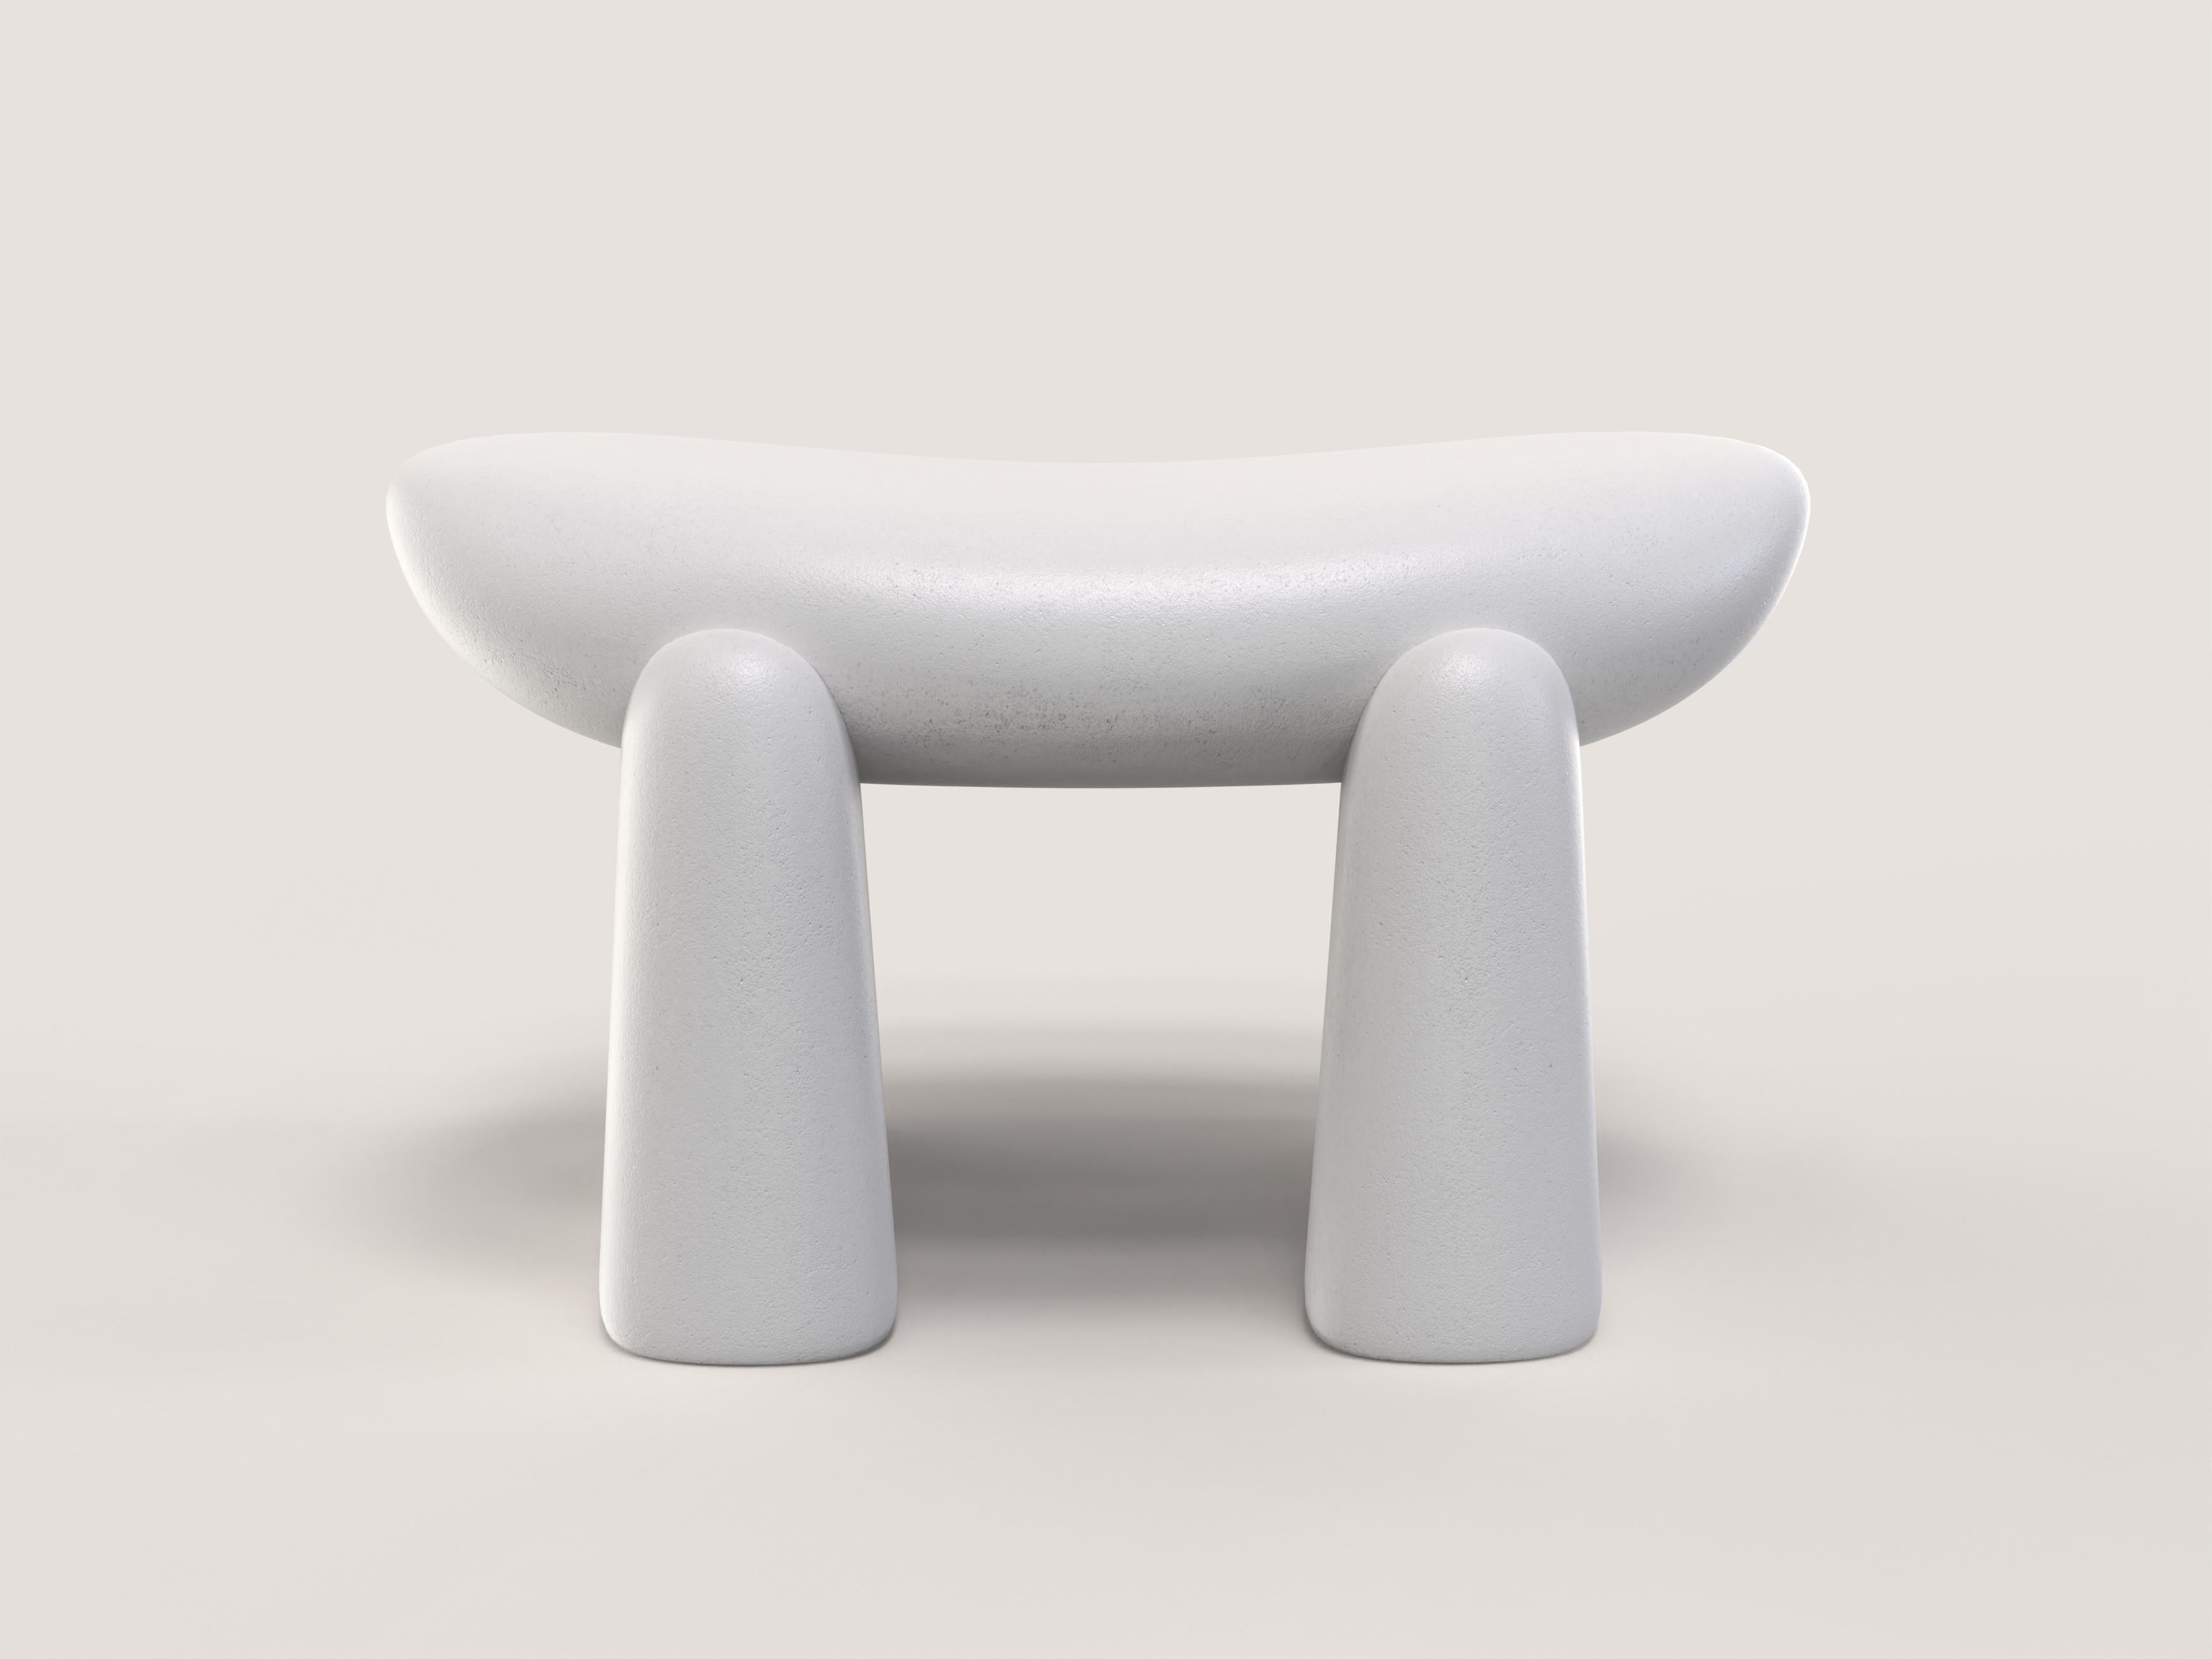 Painted Contemporary Limited Edition Signed Stool, Pau V2 by Edizione Limitata For Sale